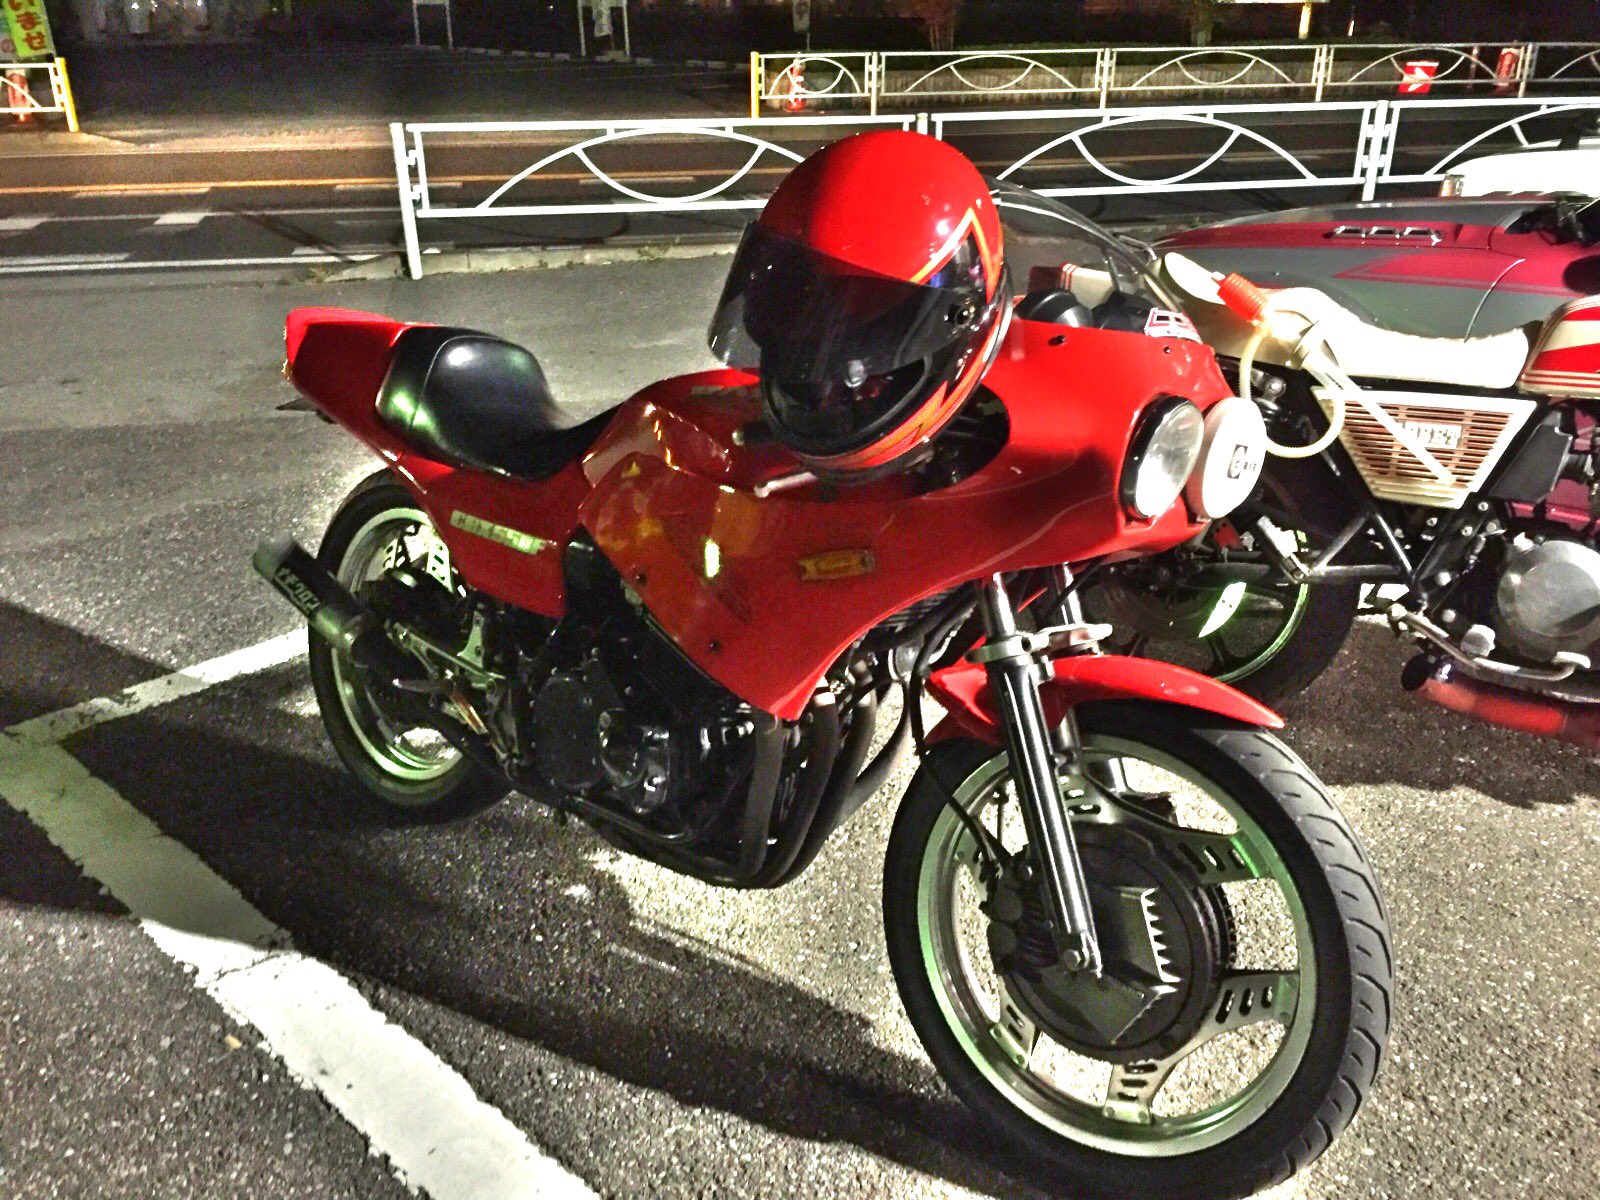 Wing Works ナチグロン Z400fx Cbx400f 同級生未だに族車 シブい